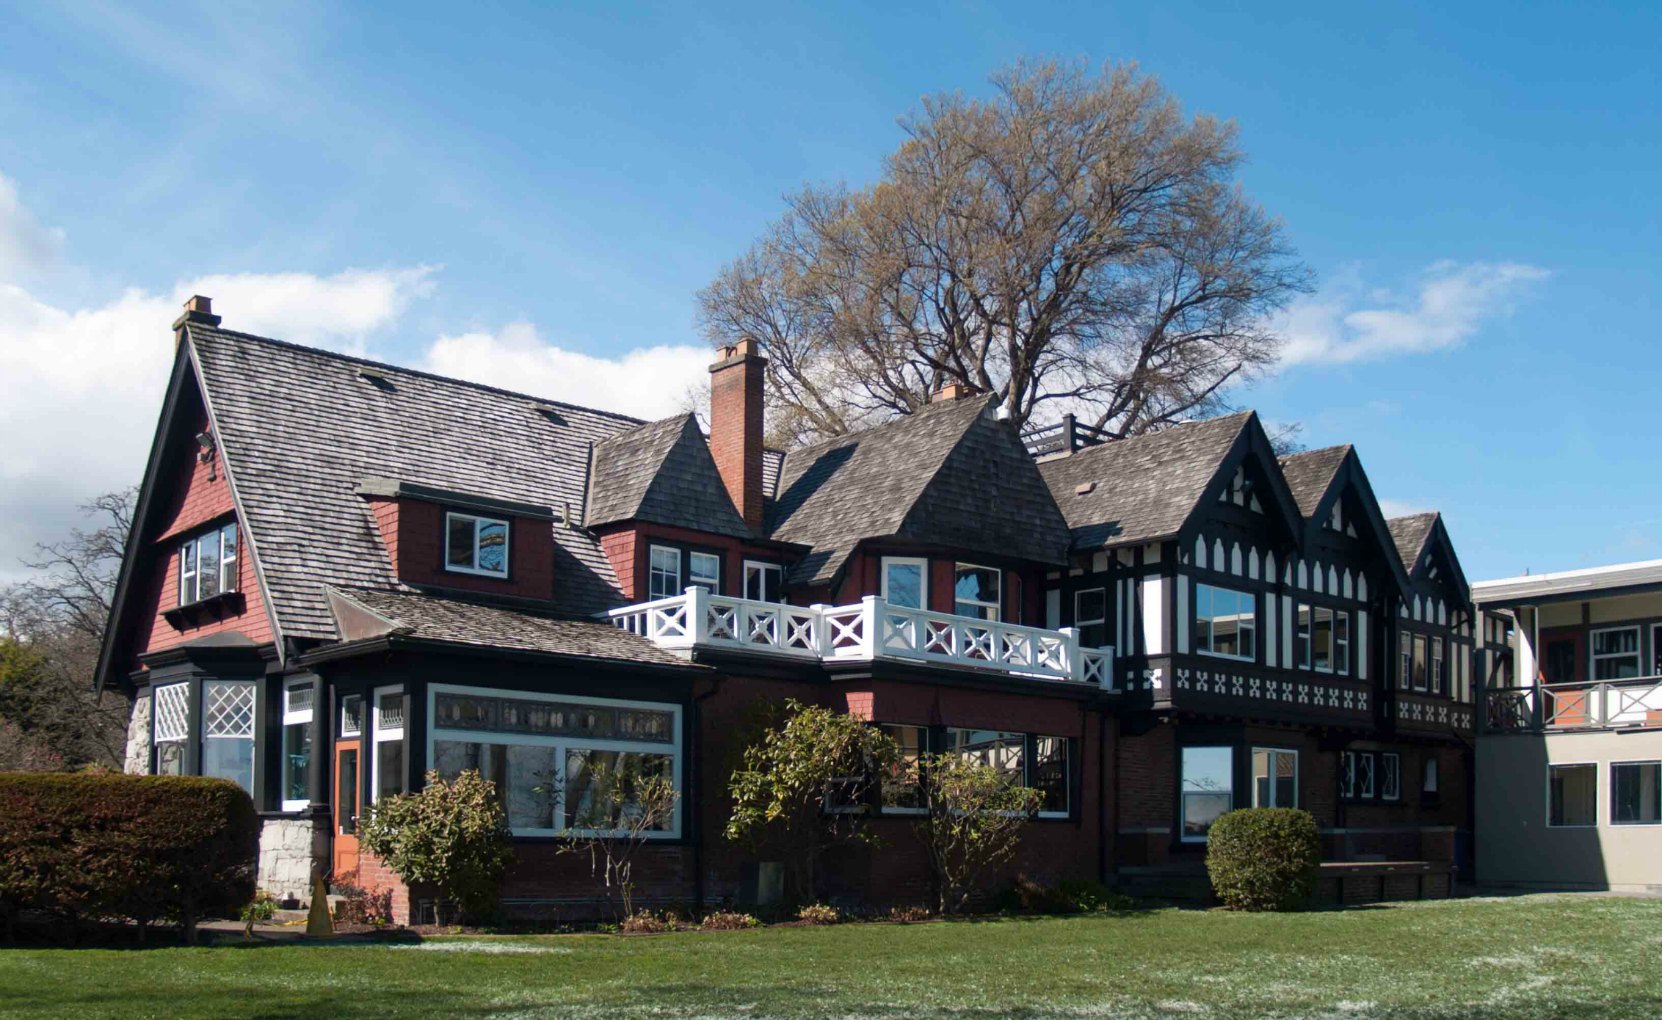 1701 Beach Drive, east, or waterfront, elevation. The left half of the building was the original 1898 house. The Tudor section on the right was the 1913 addition. The structure at the extreme right is a later addition by Glenlyon Norfolk School.